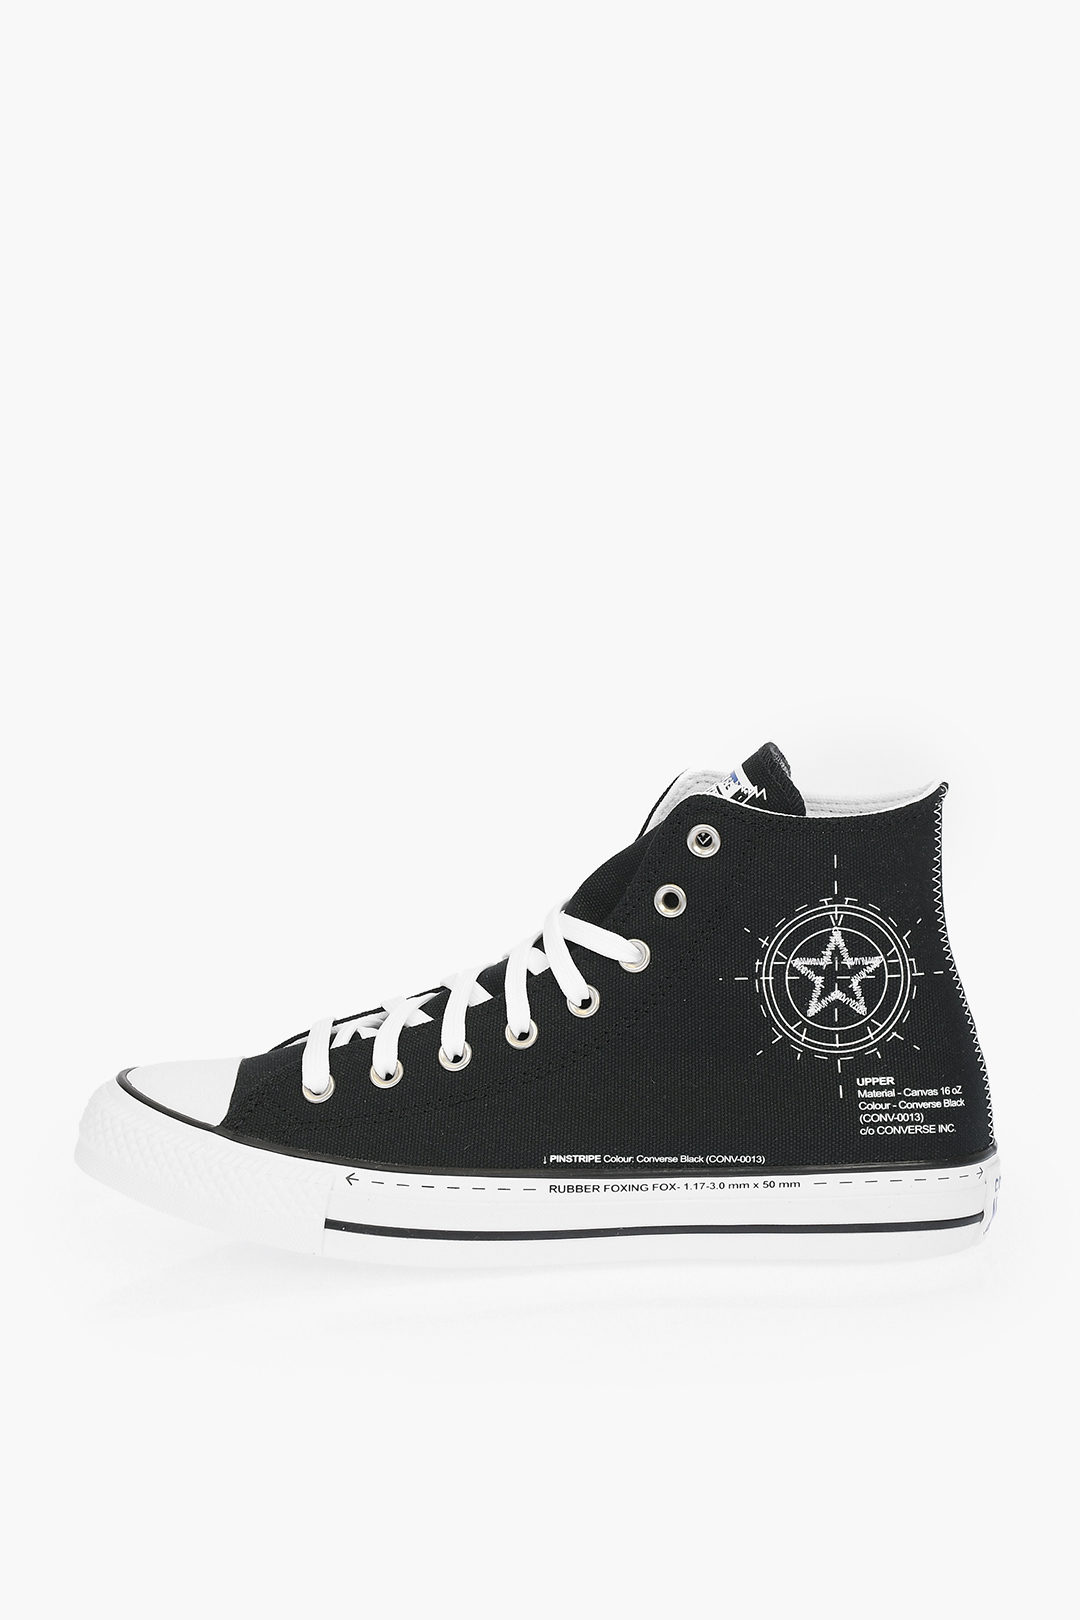 Converse CHUCK TAYLOR ALL STAR Contrasting Printed High Top Sneakers men -  Glamood Outlet